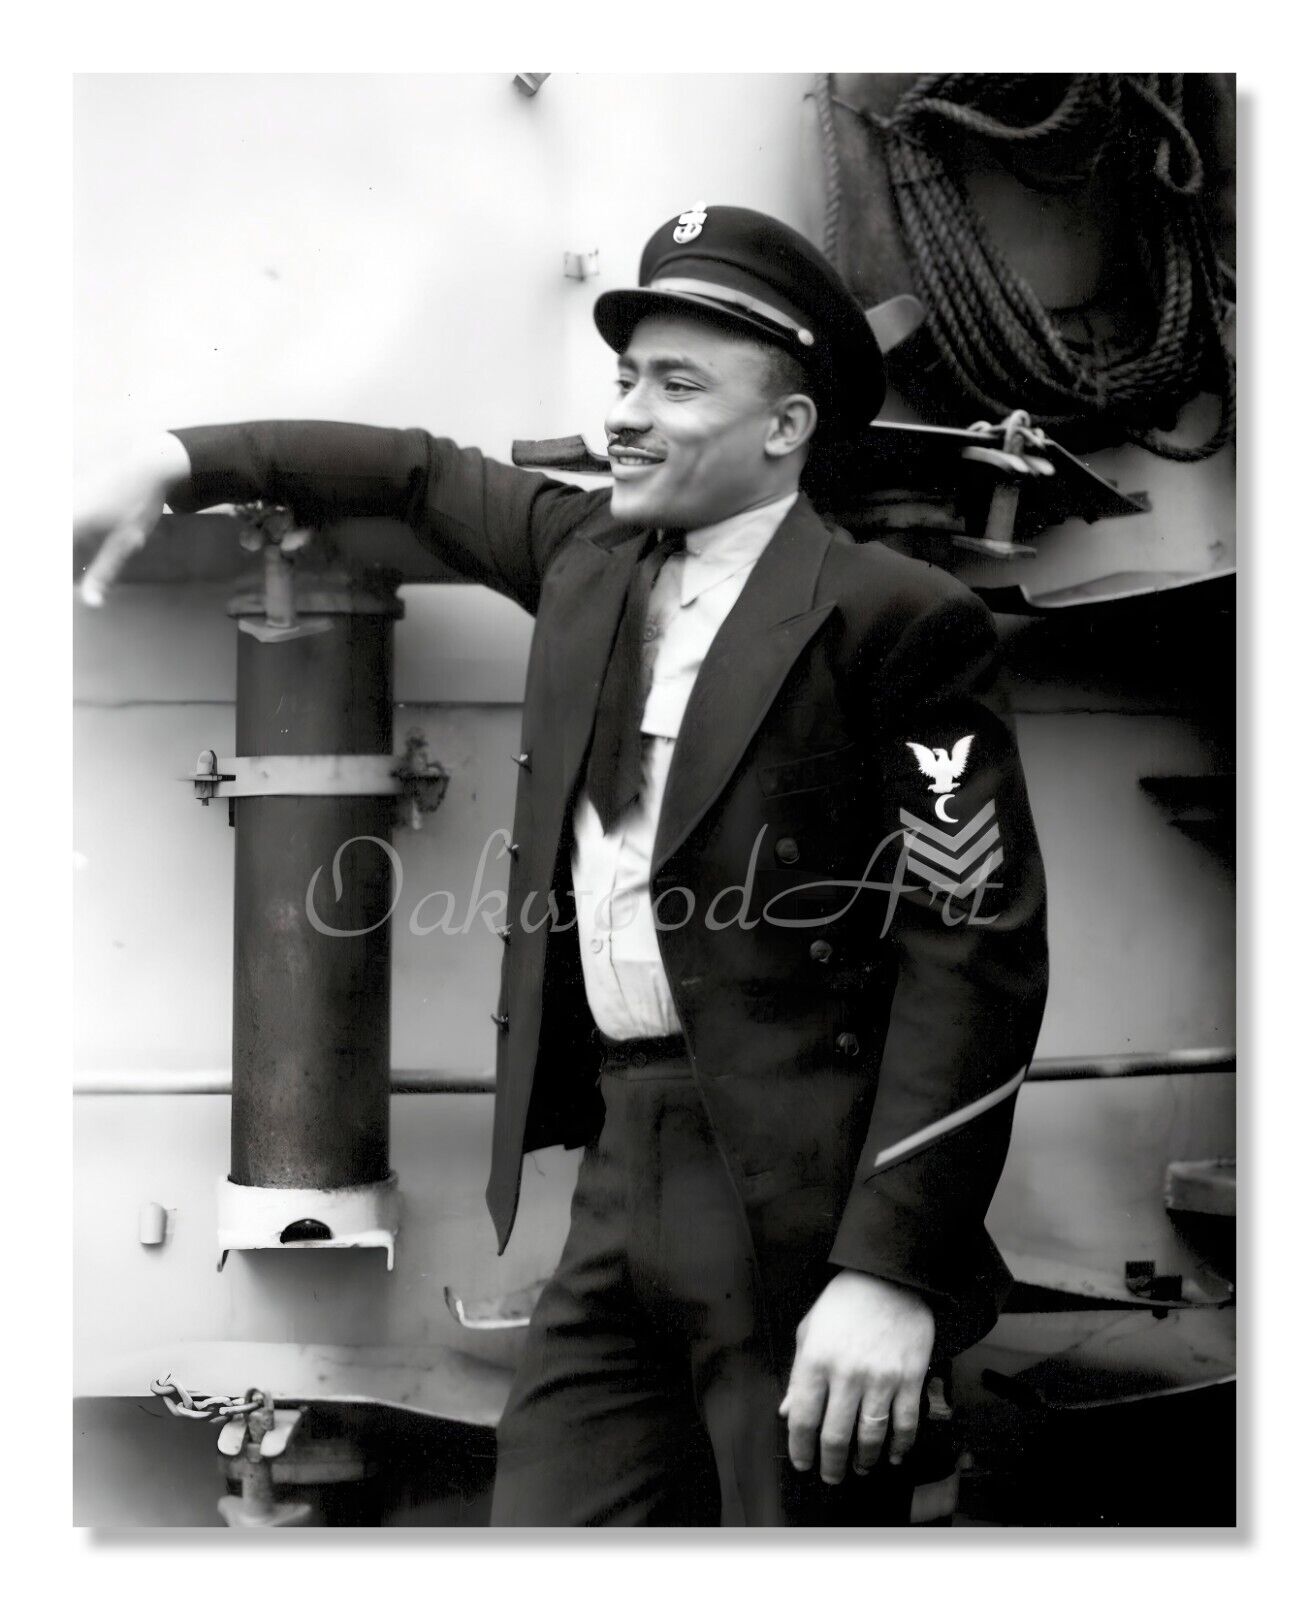 Black US Naval Officer On Board the USS Otter c1945, Vintage Photo Reprint